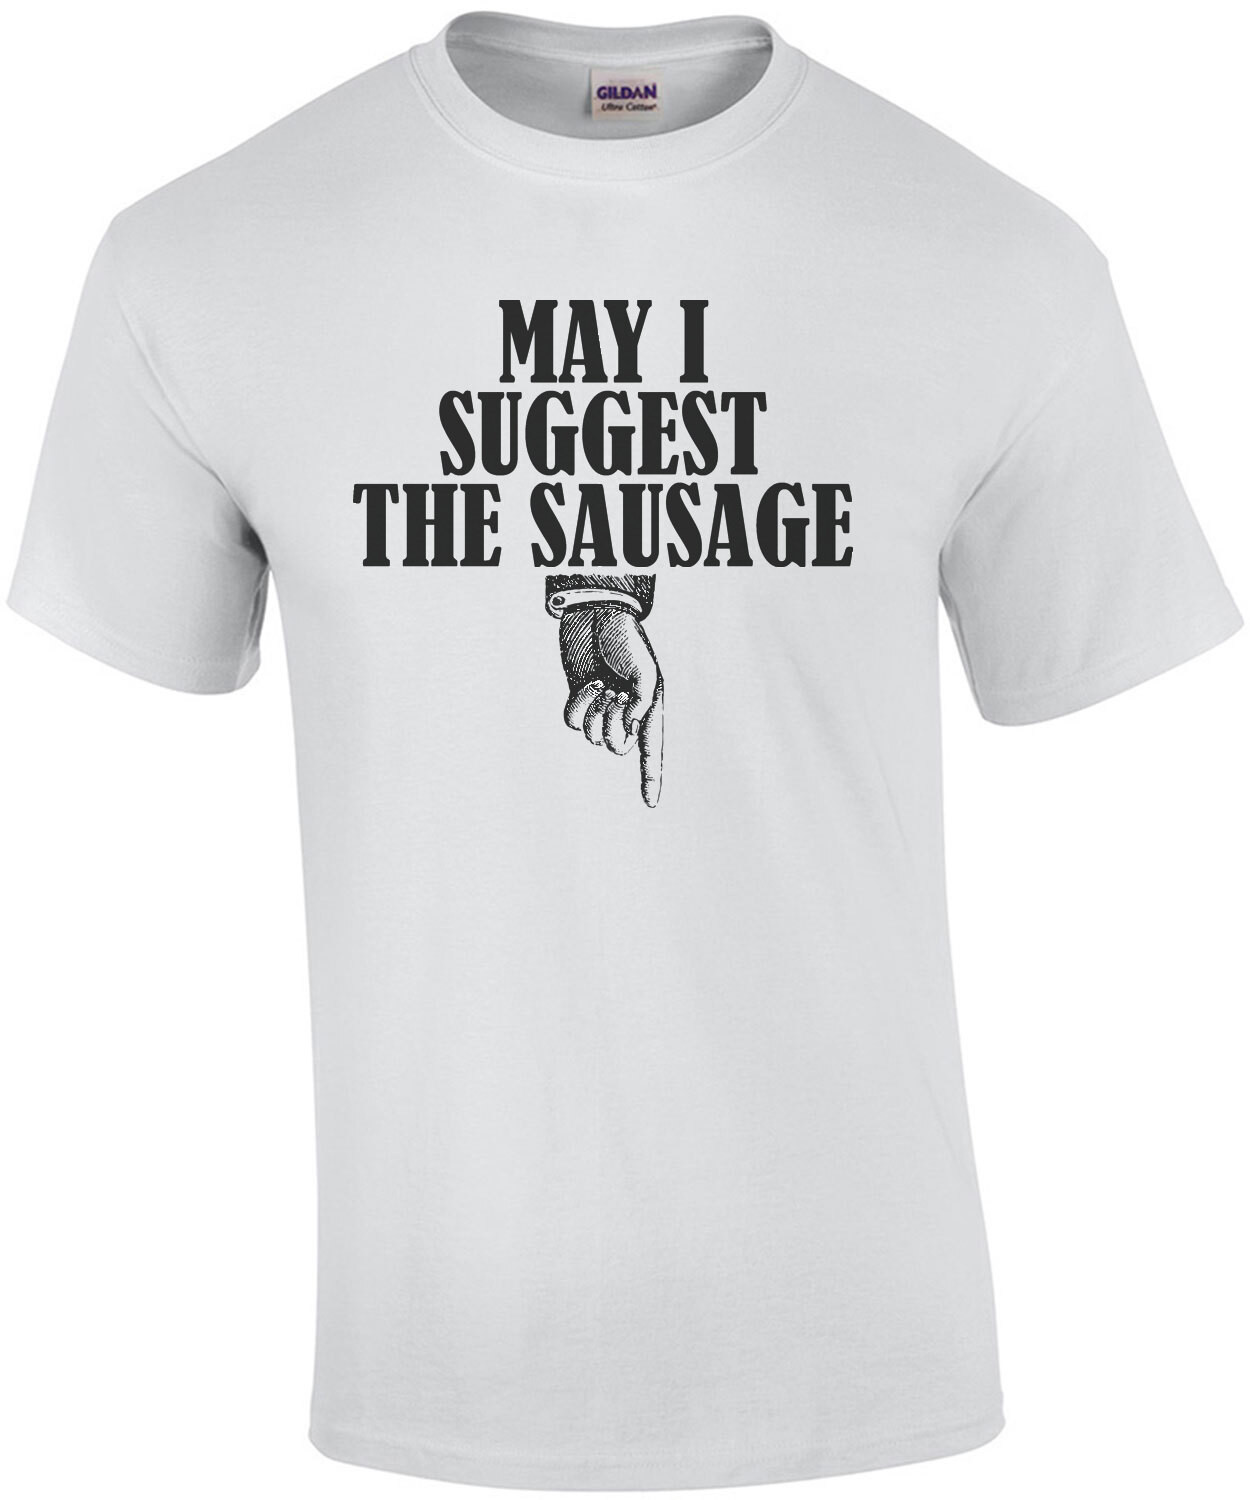 May I suggest the sausage - funny sexual offensive t-shirt